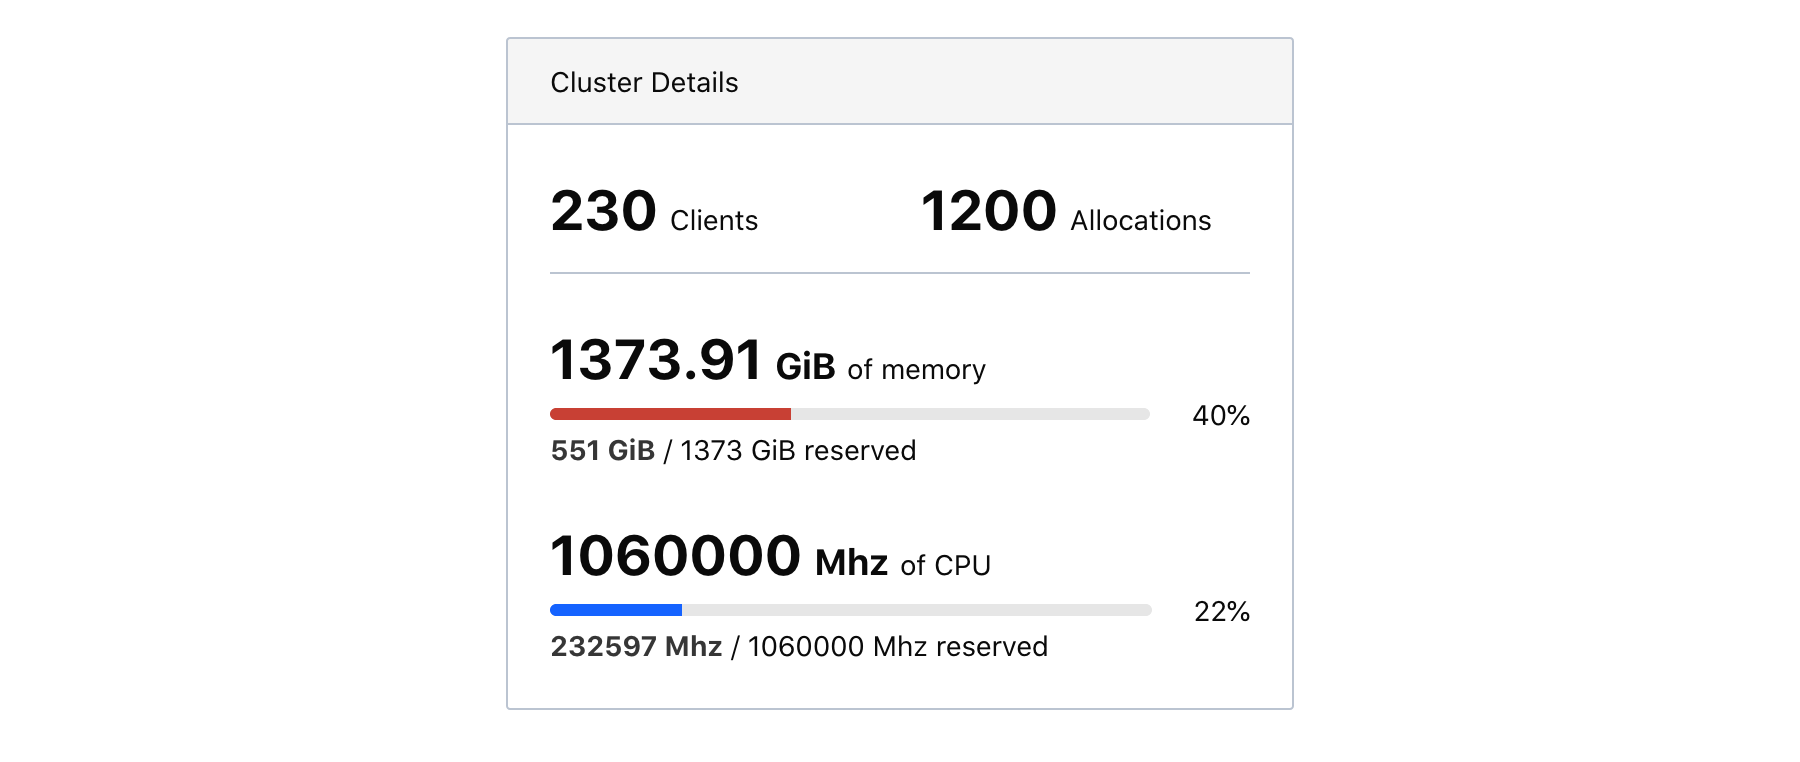 Aggregate cluster statistics, including 230 clients, 1200 allocations, 40% of memory reserved, and 22% of CPU reserved.